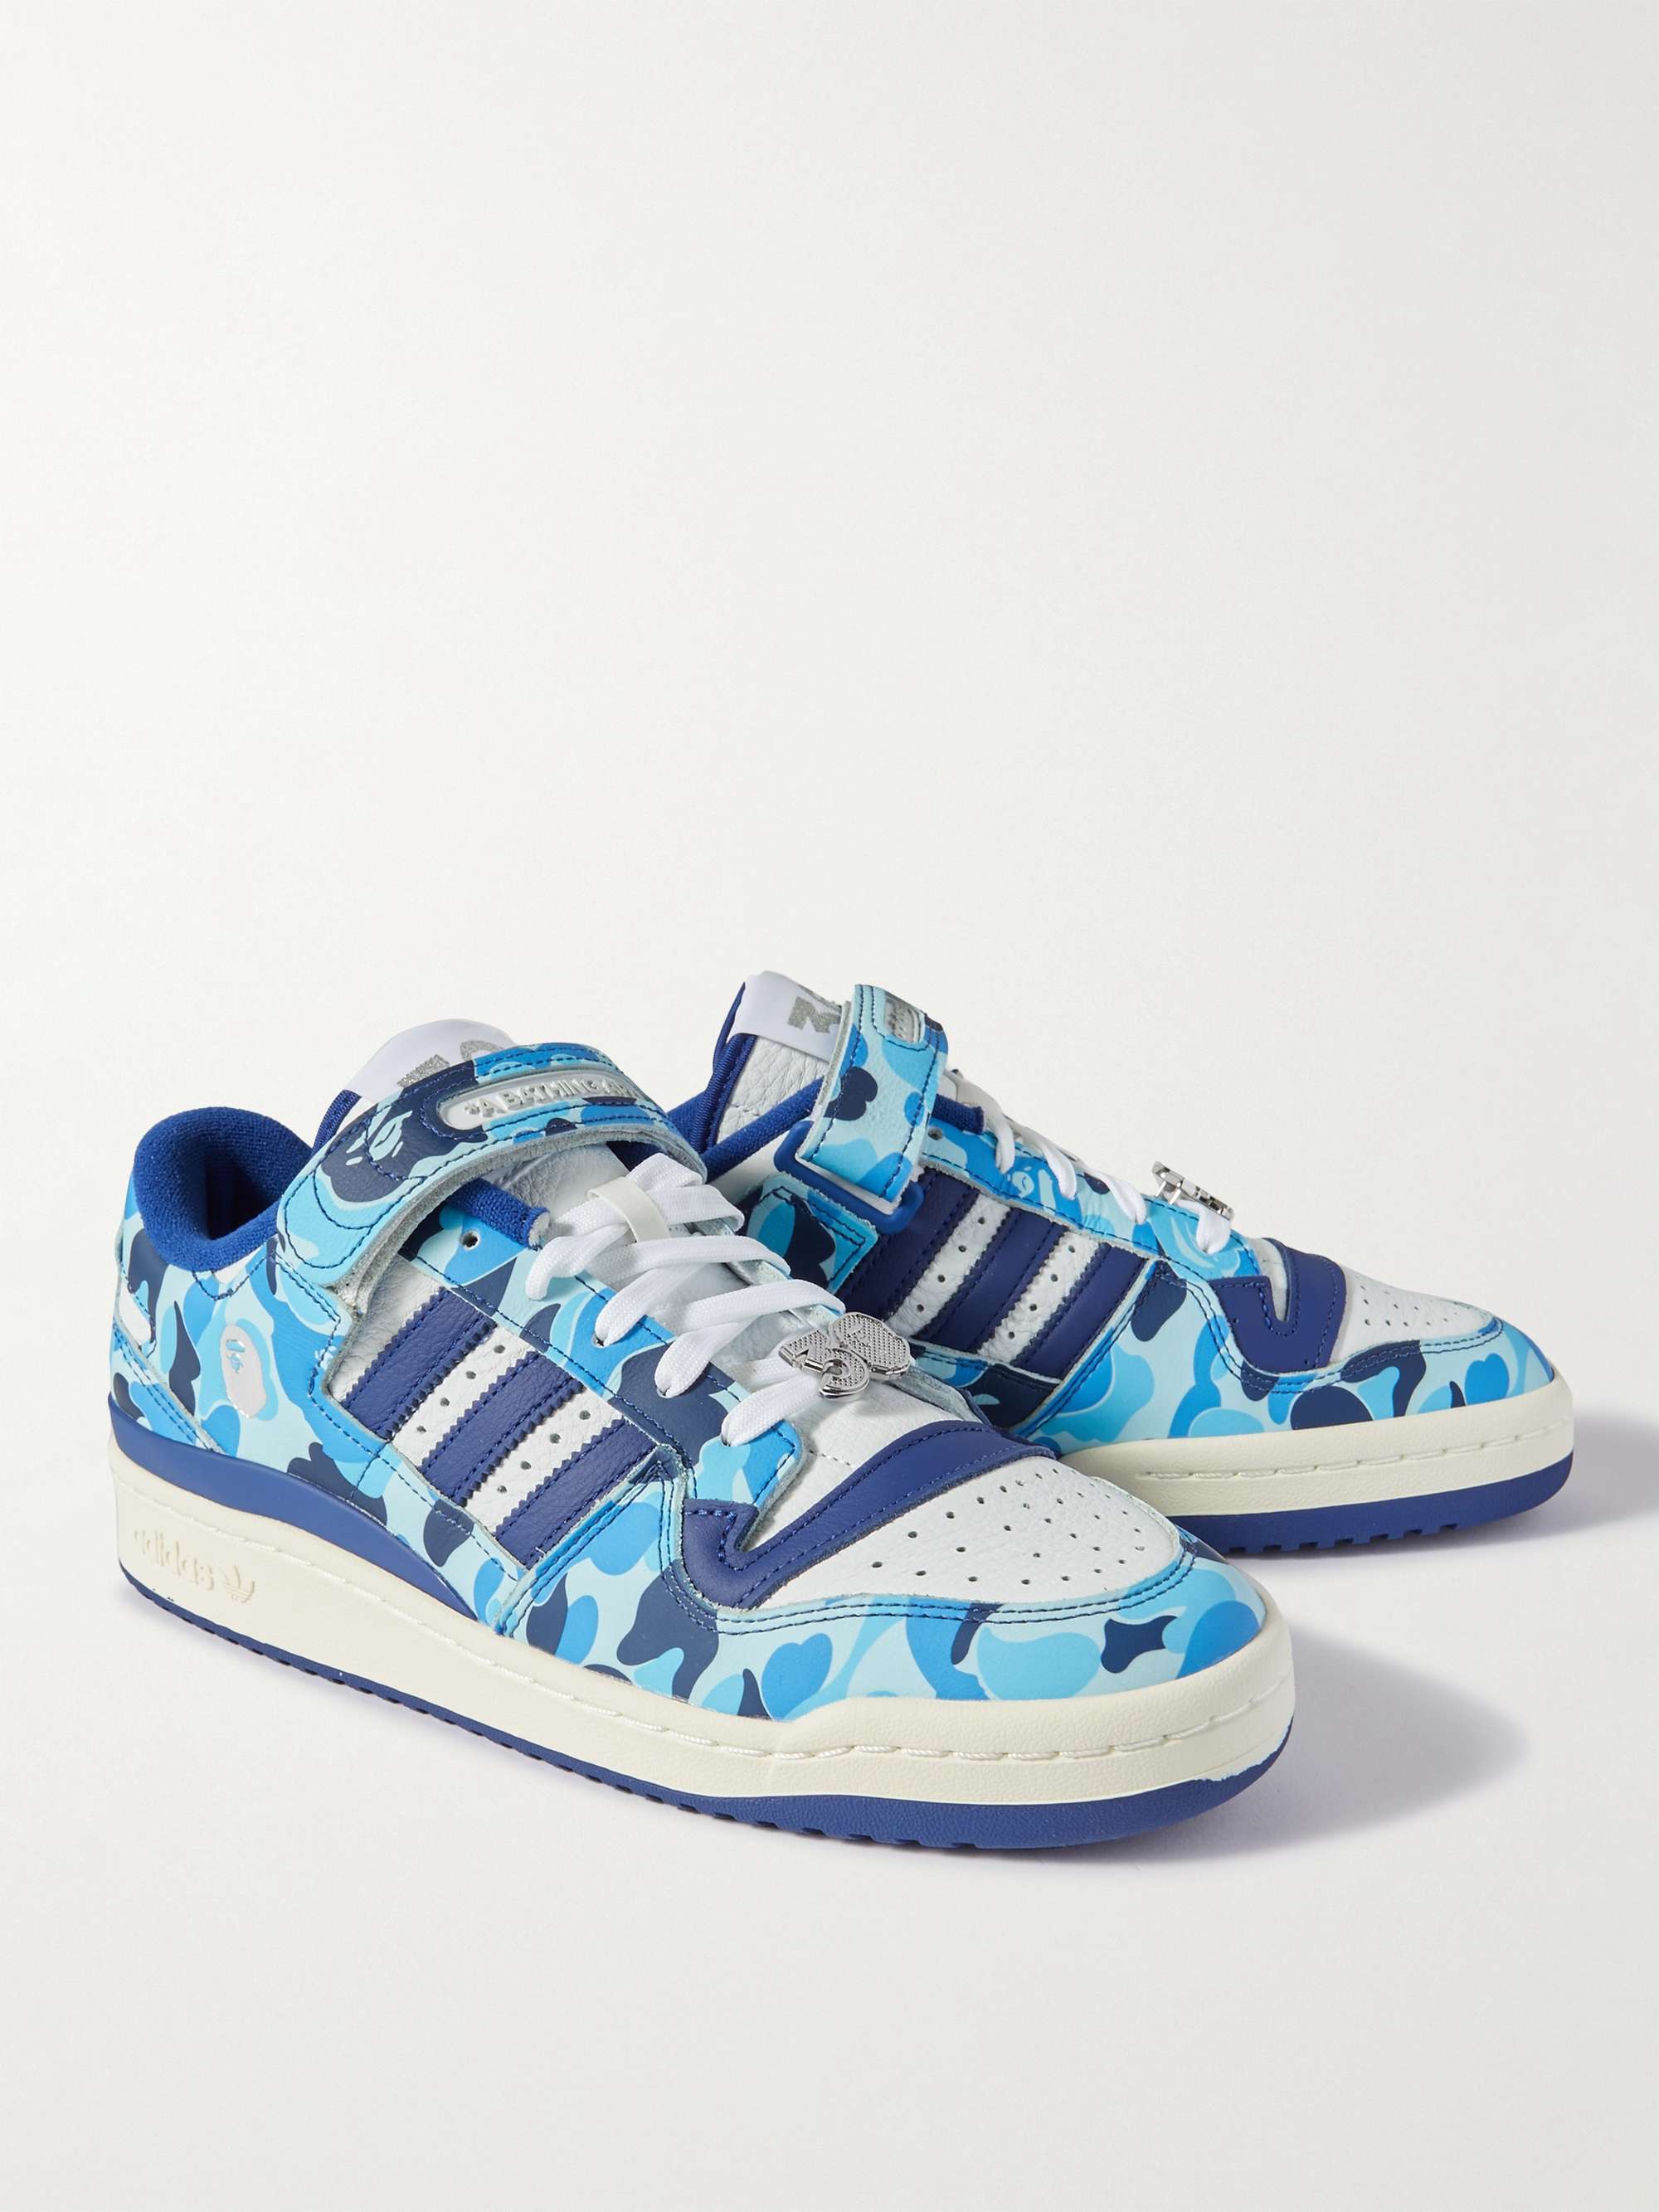 ADIDAS ORIGINALS + A Bathing Ape Forum 84 Low Embellished Printed Leather  Sneakers | MR PORTER